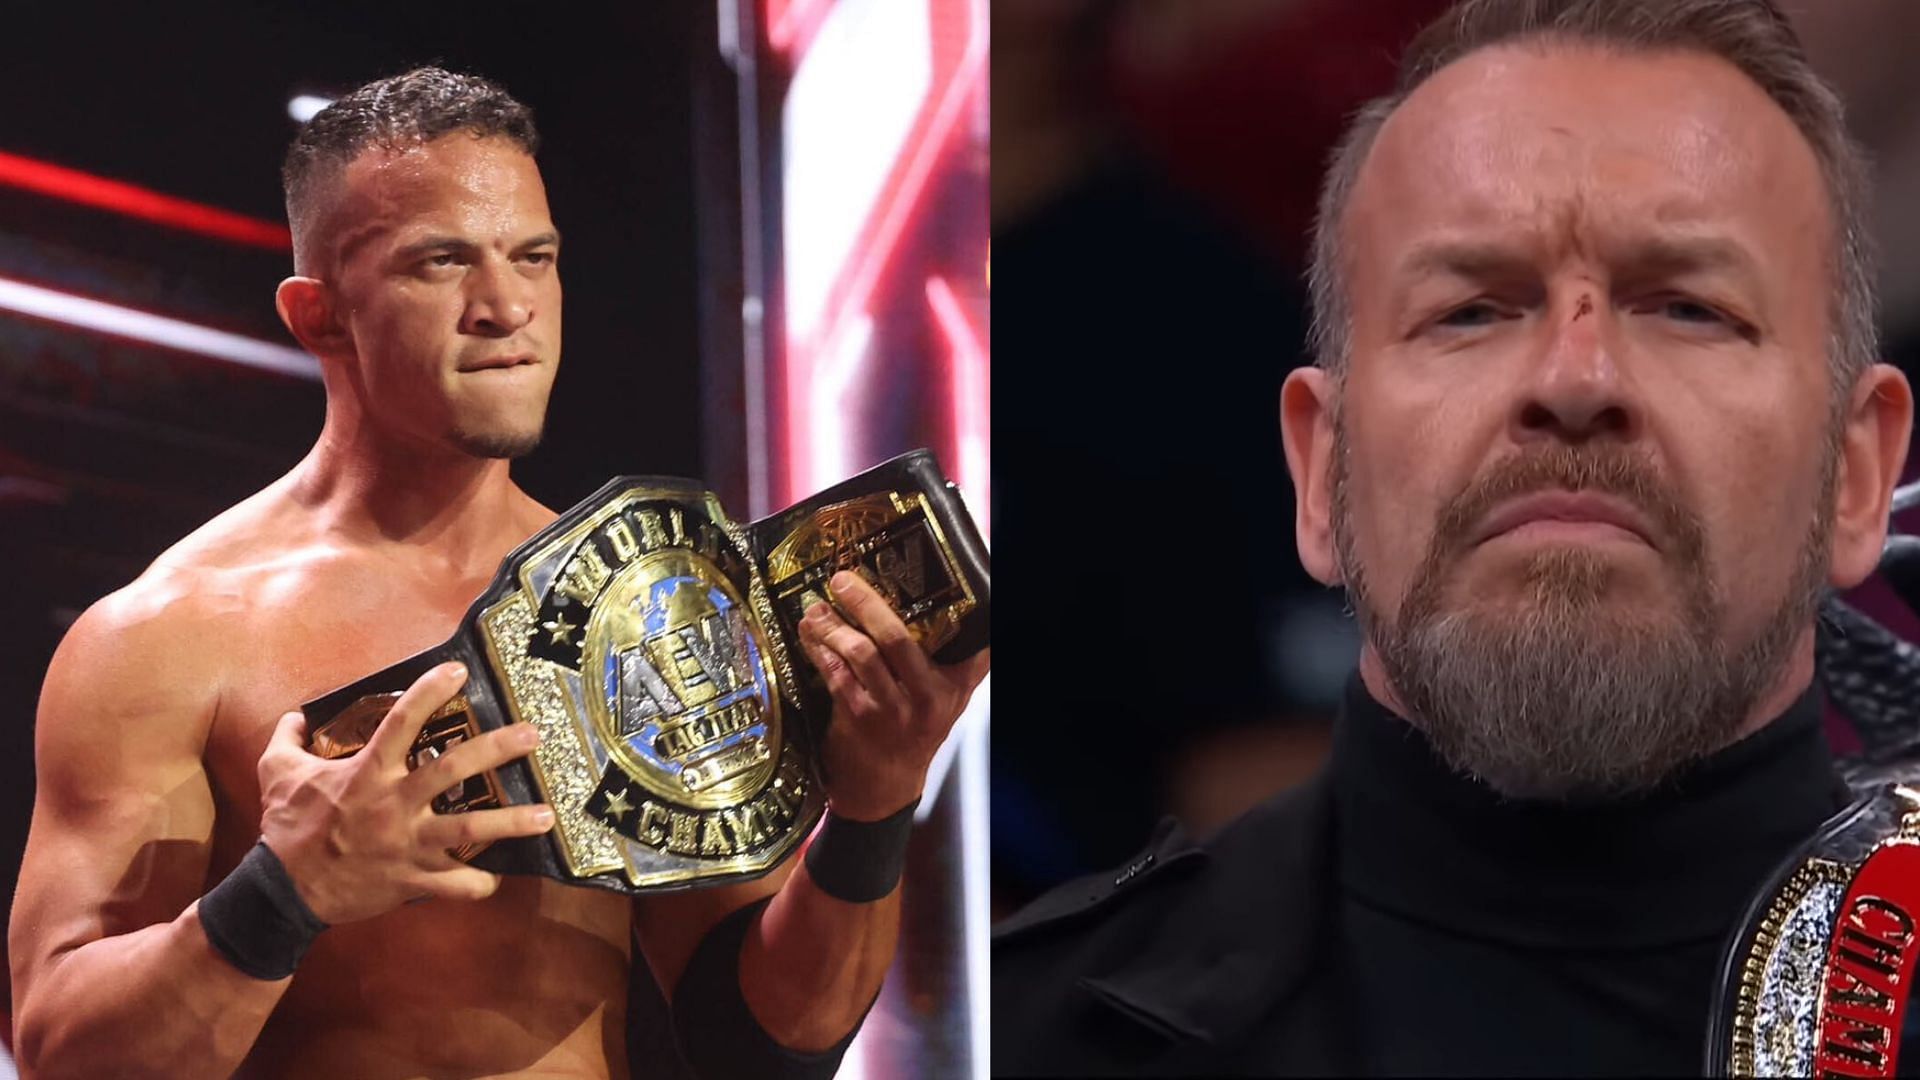 Ricky Starks and Christian Cage are two of the most popular stars of AEW